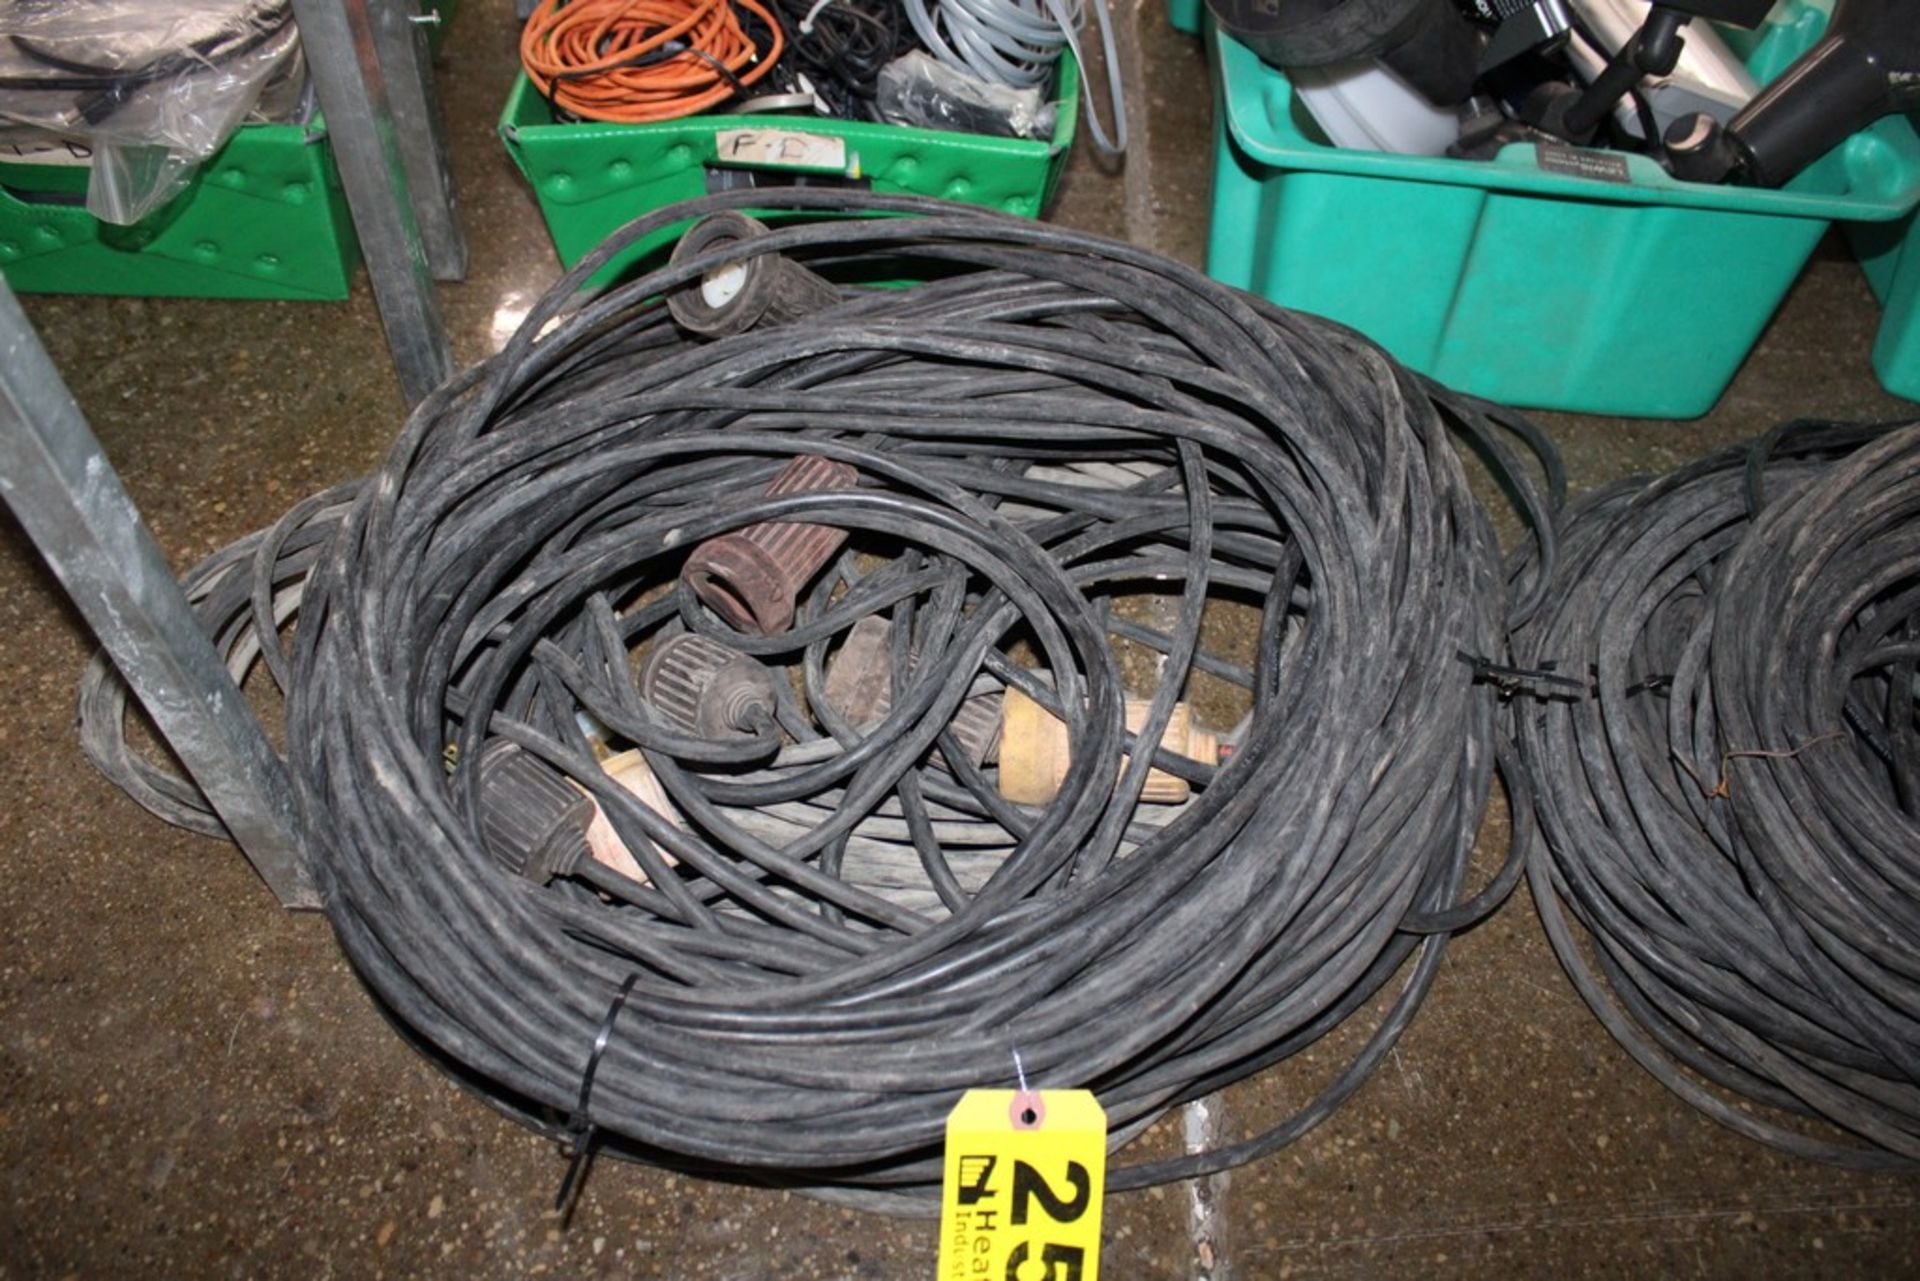 (5) EXTENSION CORDS